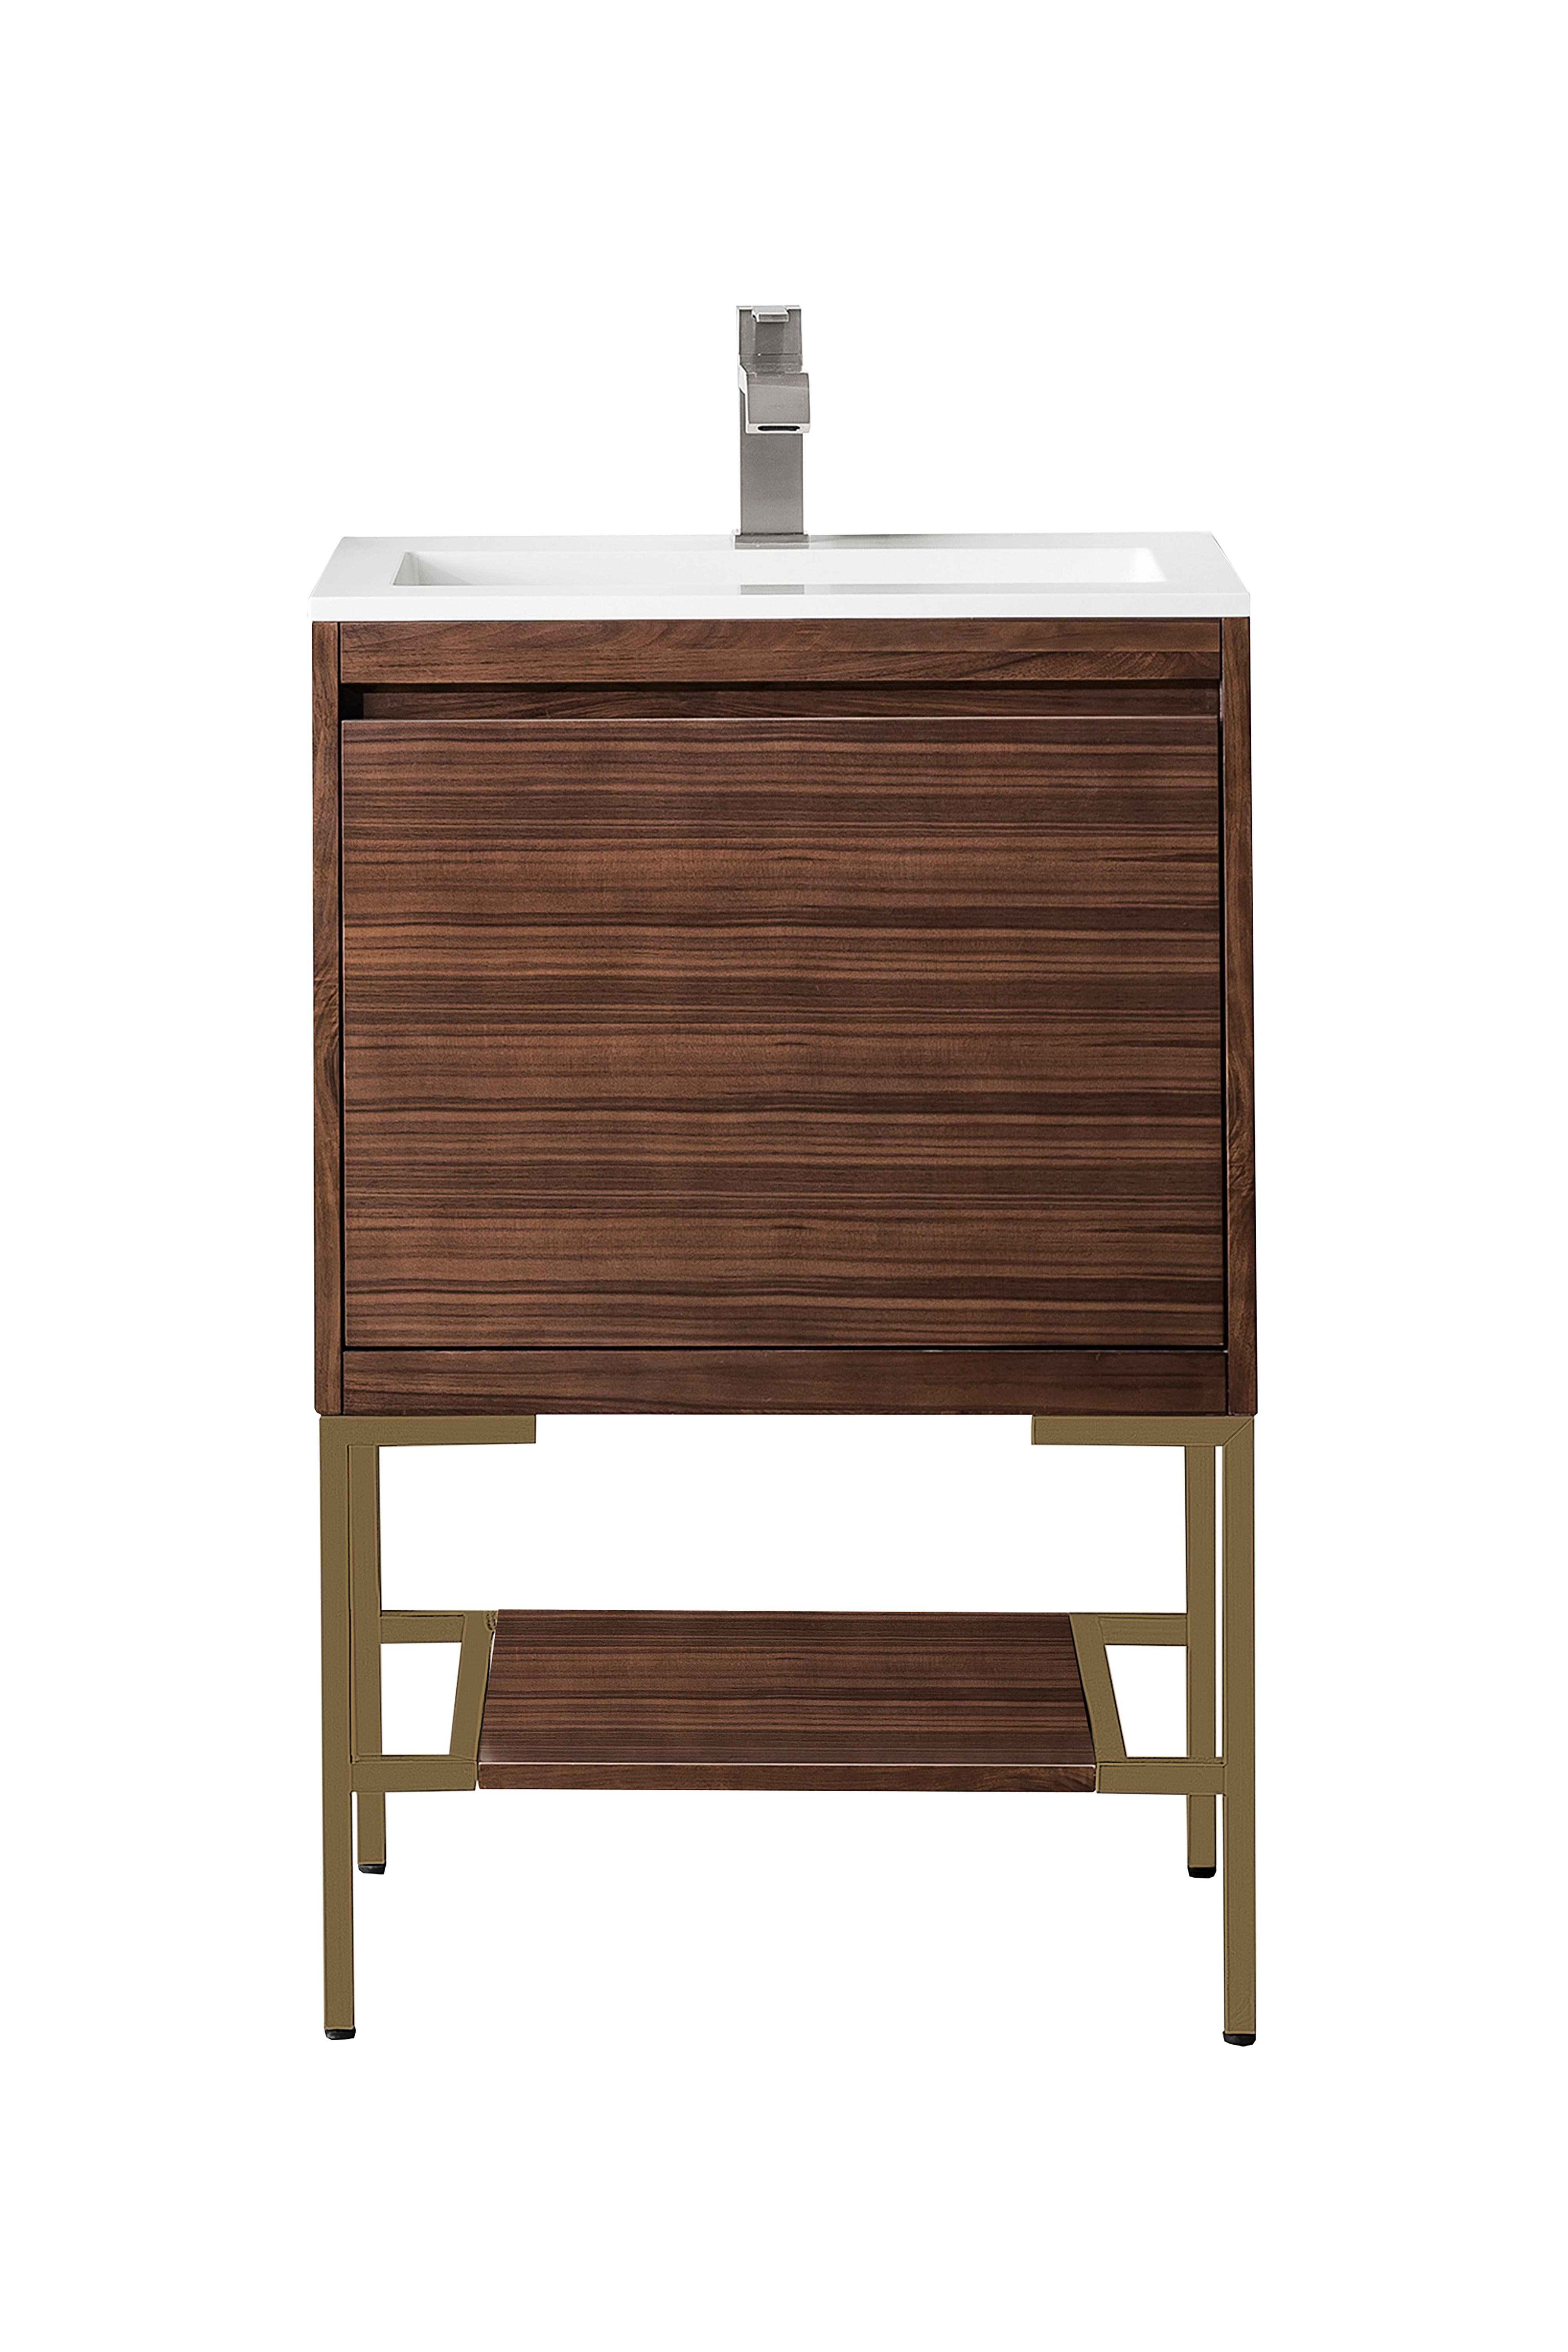 James Martin 801V23.6WLTRGDGW Milan 23.6" Single Vanity Cabinet, Mid Century Walnut, Radiant Gold w/Glossy White Composite Top